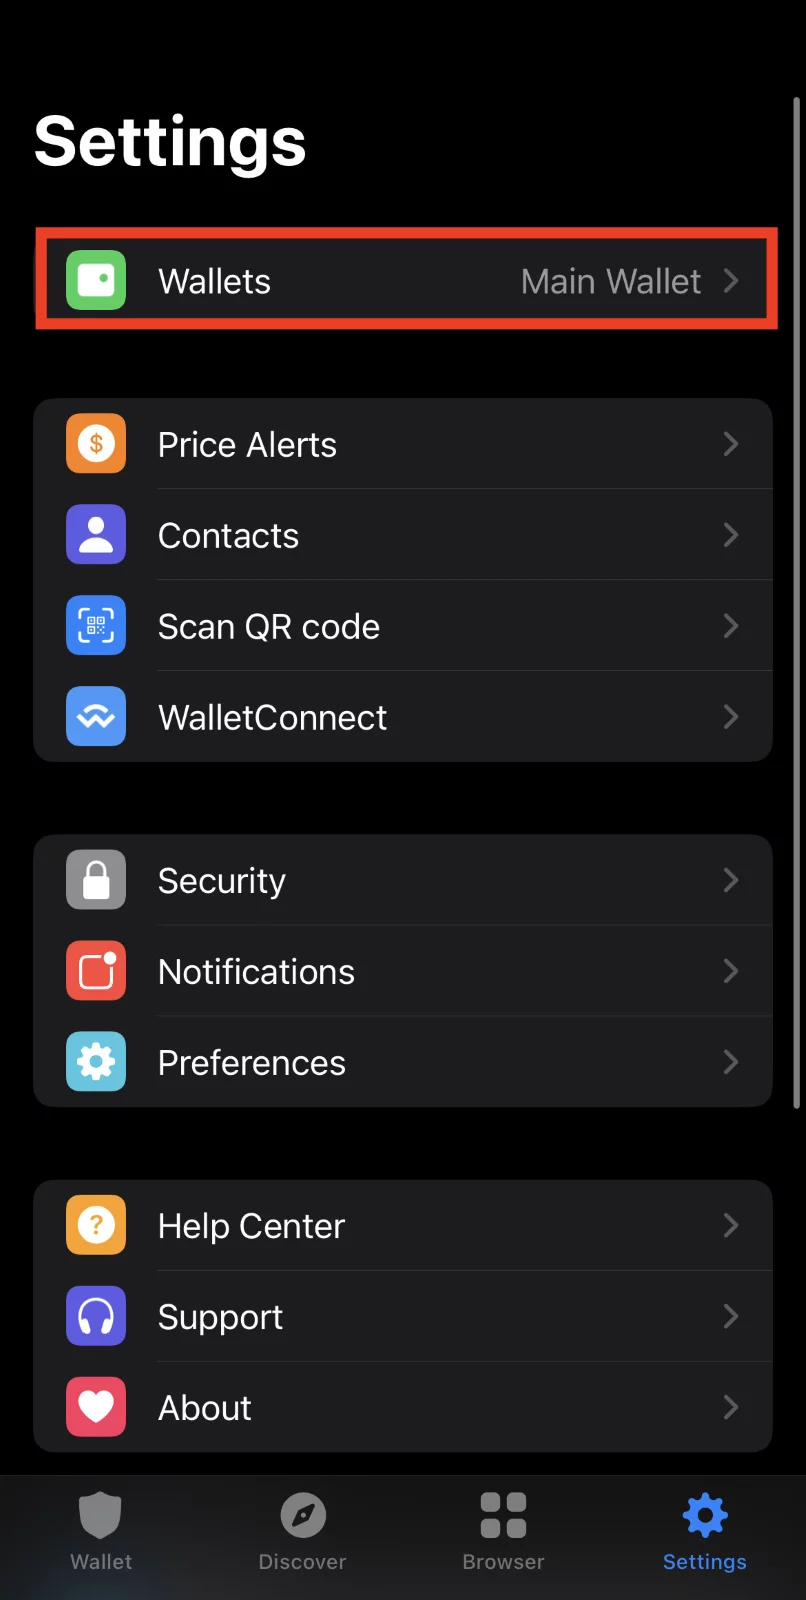 Step 2. Select the "Wallets" Option from the Menu